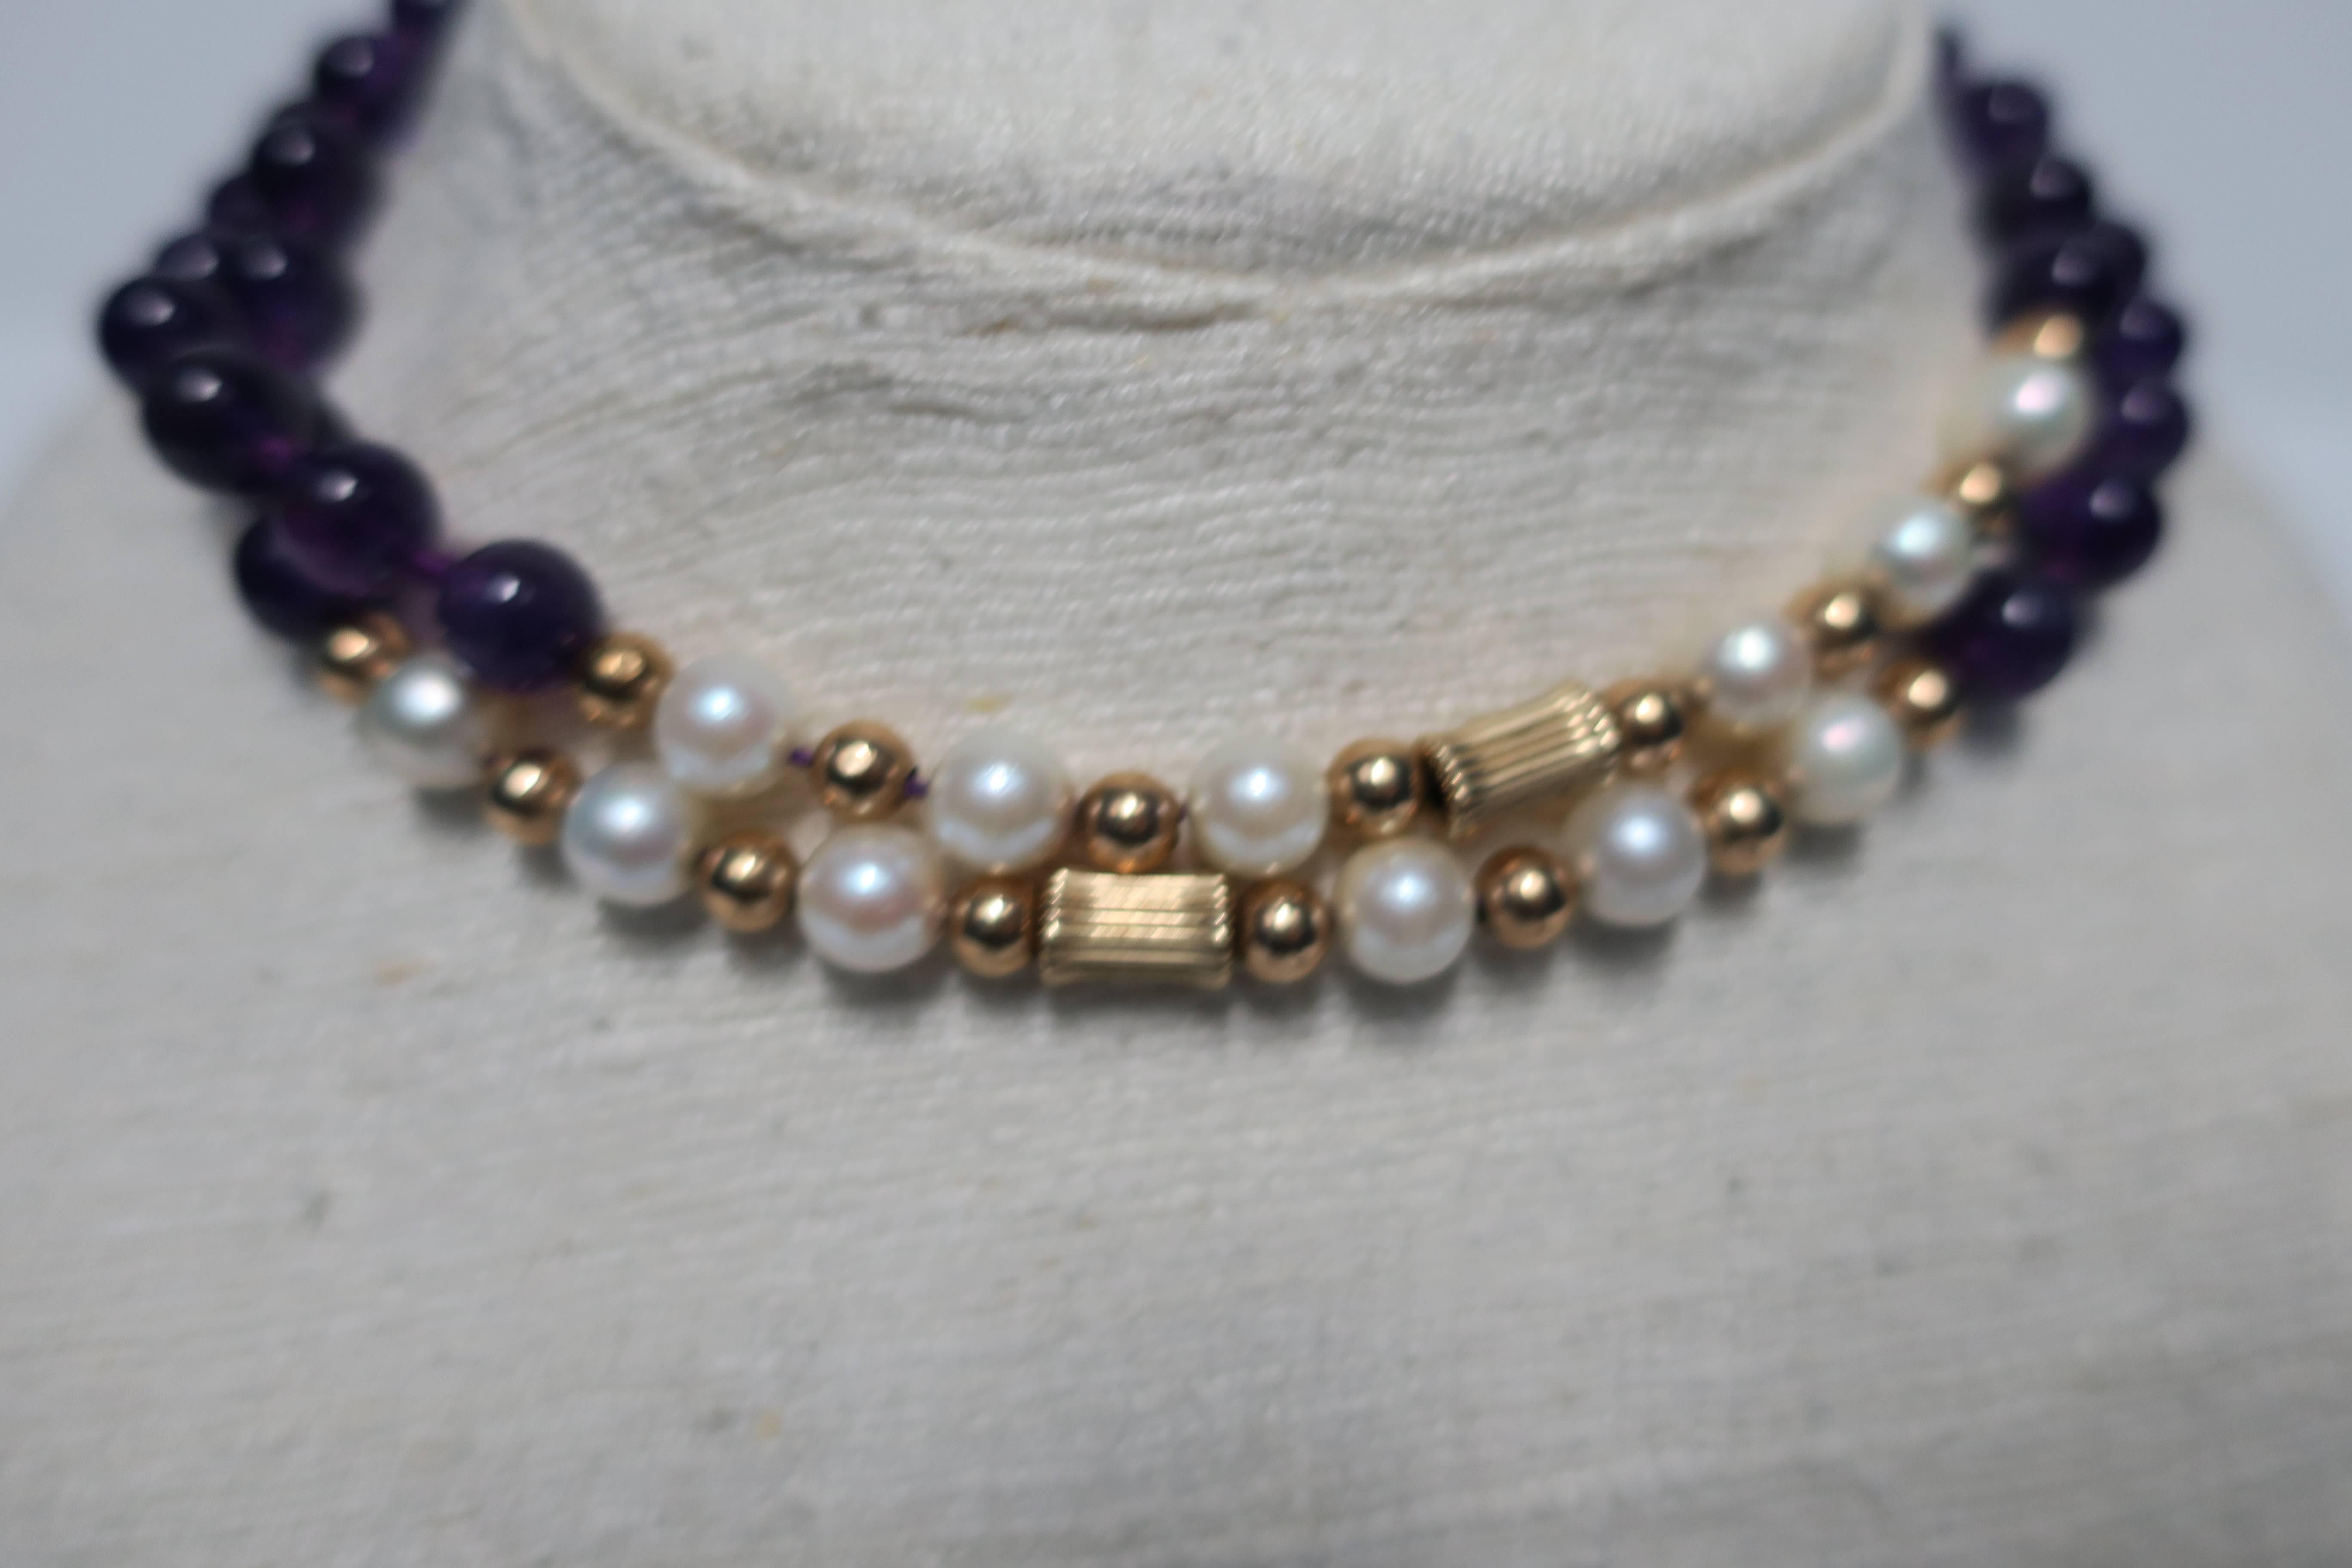 Bead and Pearl Necklace or Choker Necklace 1